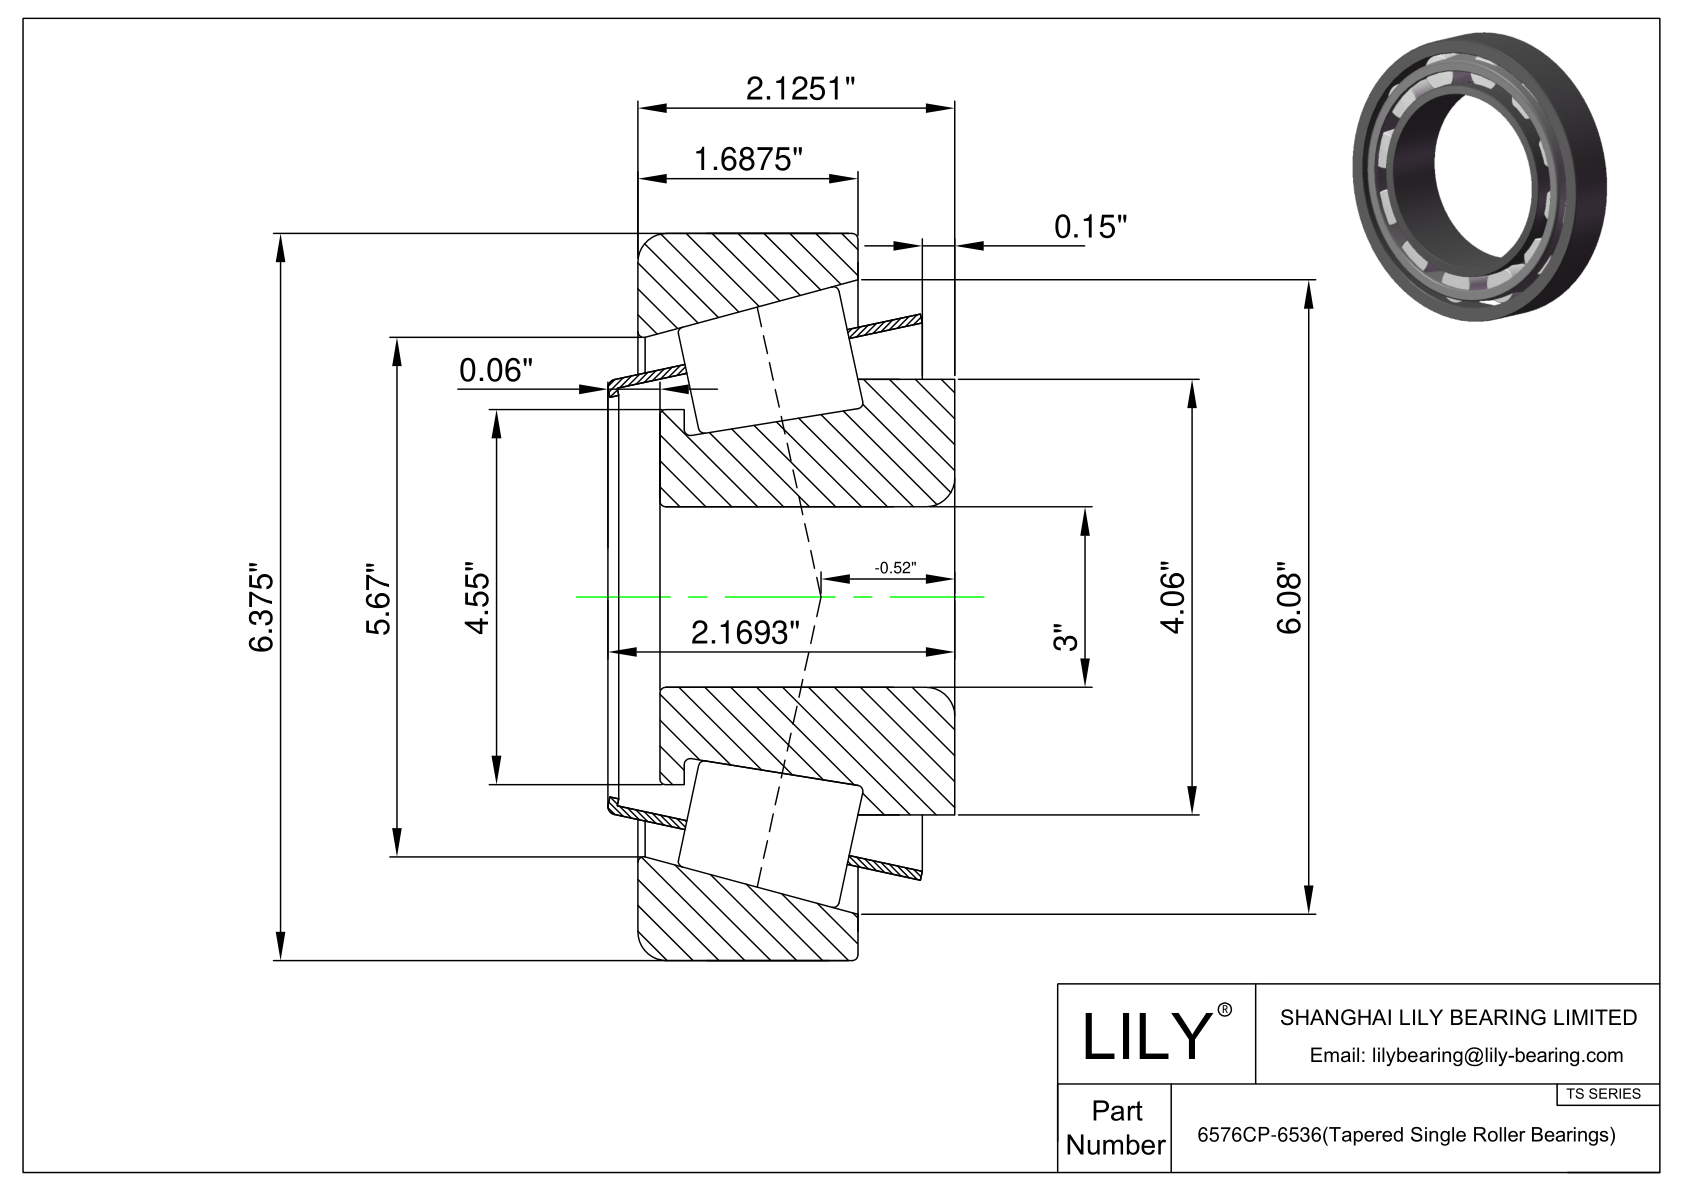 6576CP-6536 TS (Tapered Single Roller Bearings) (Imperial) cad drawing